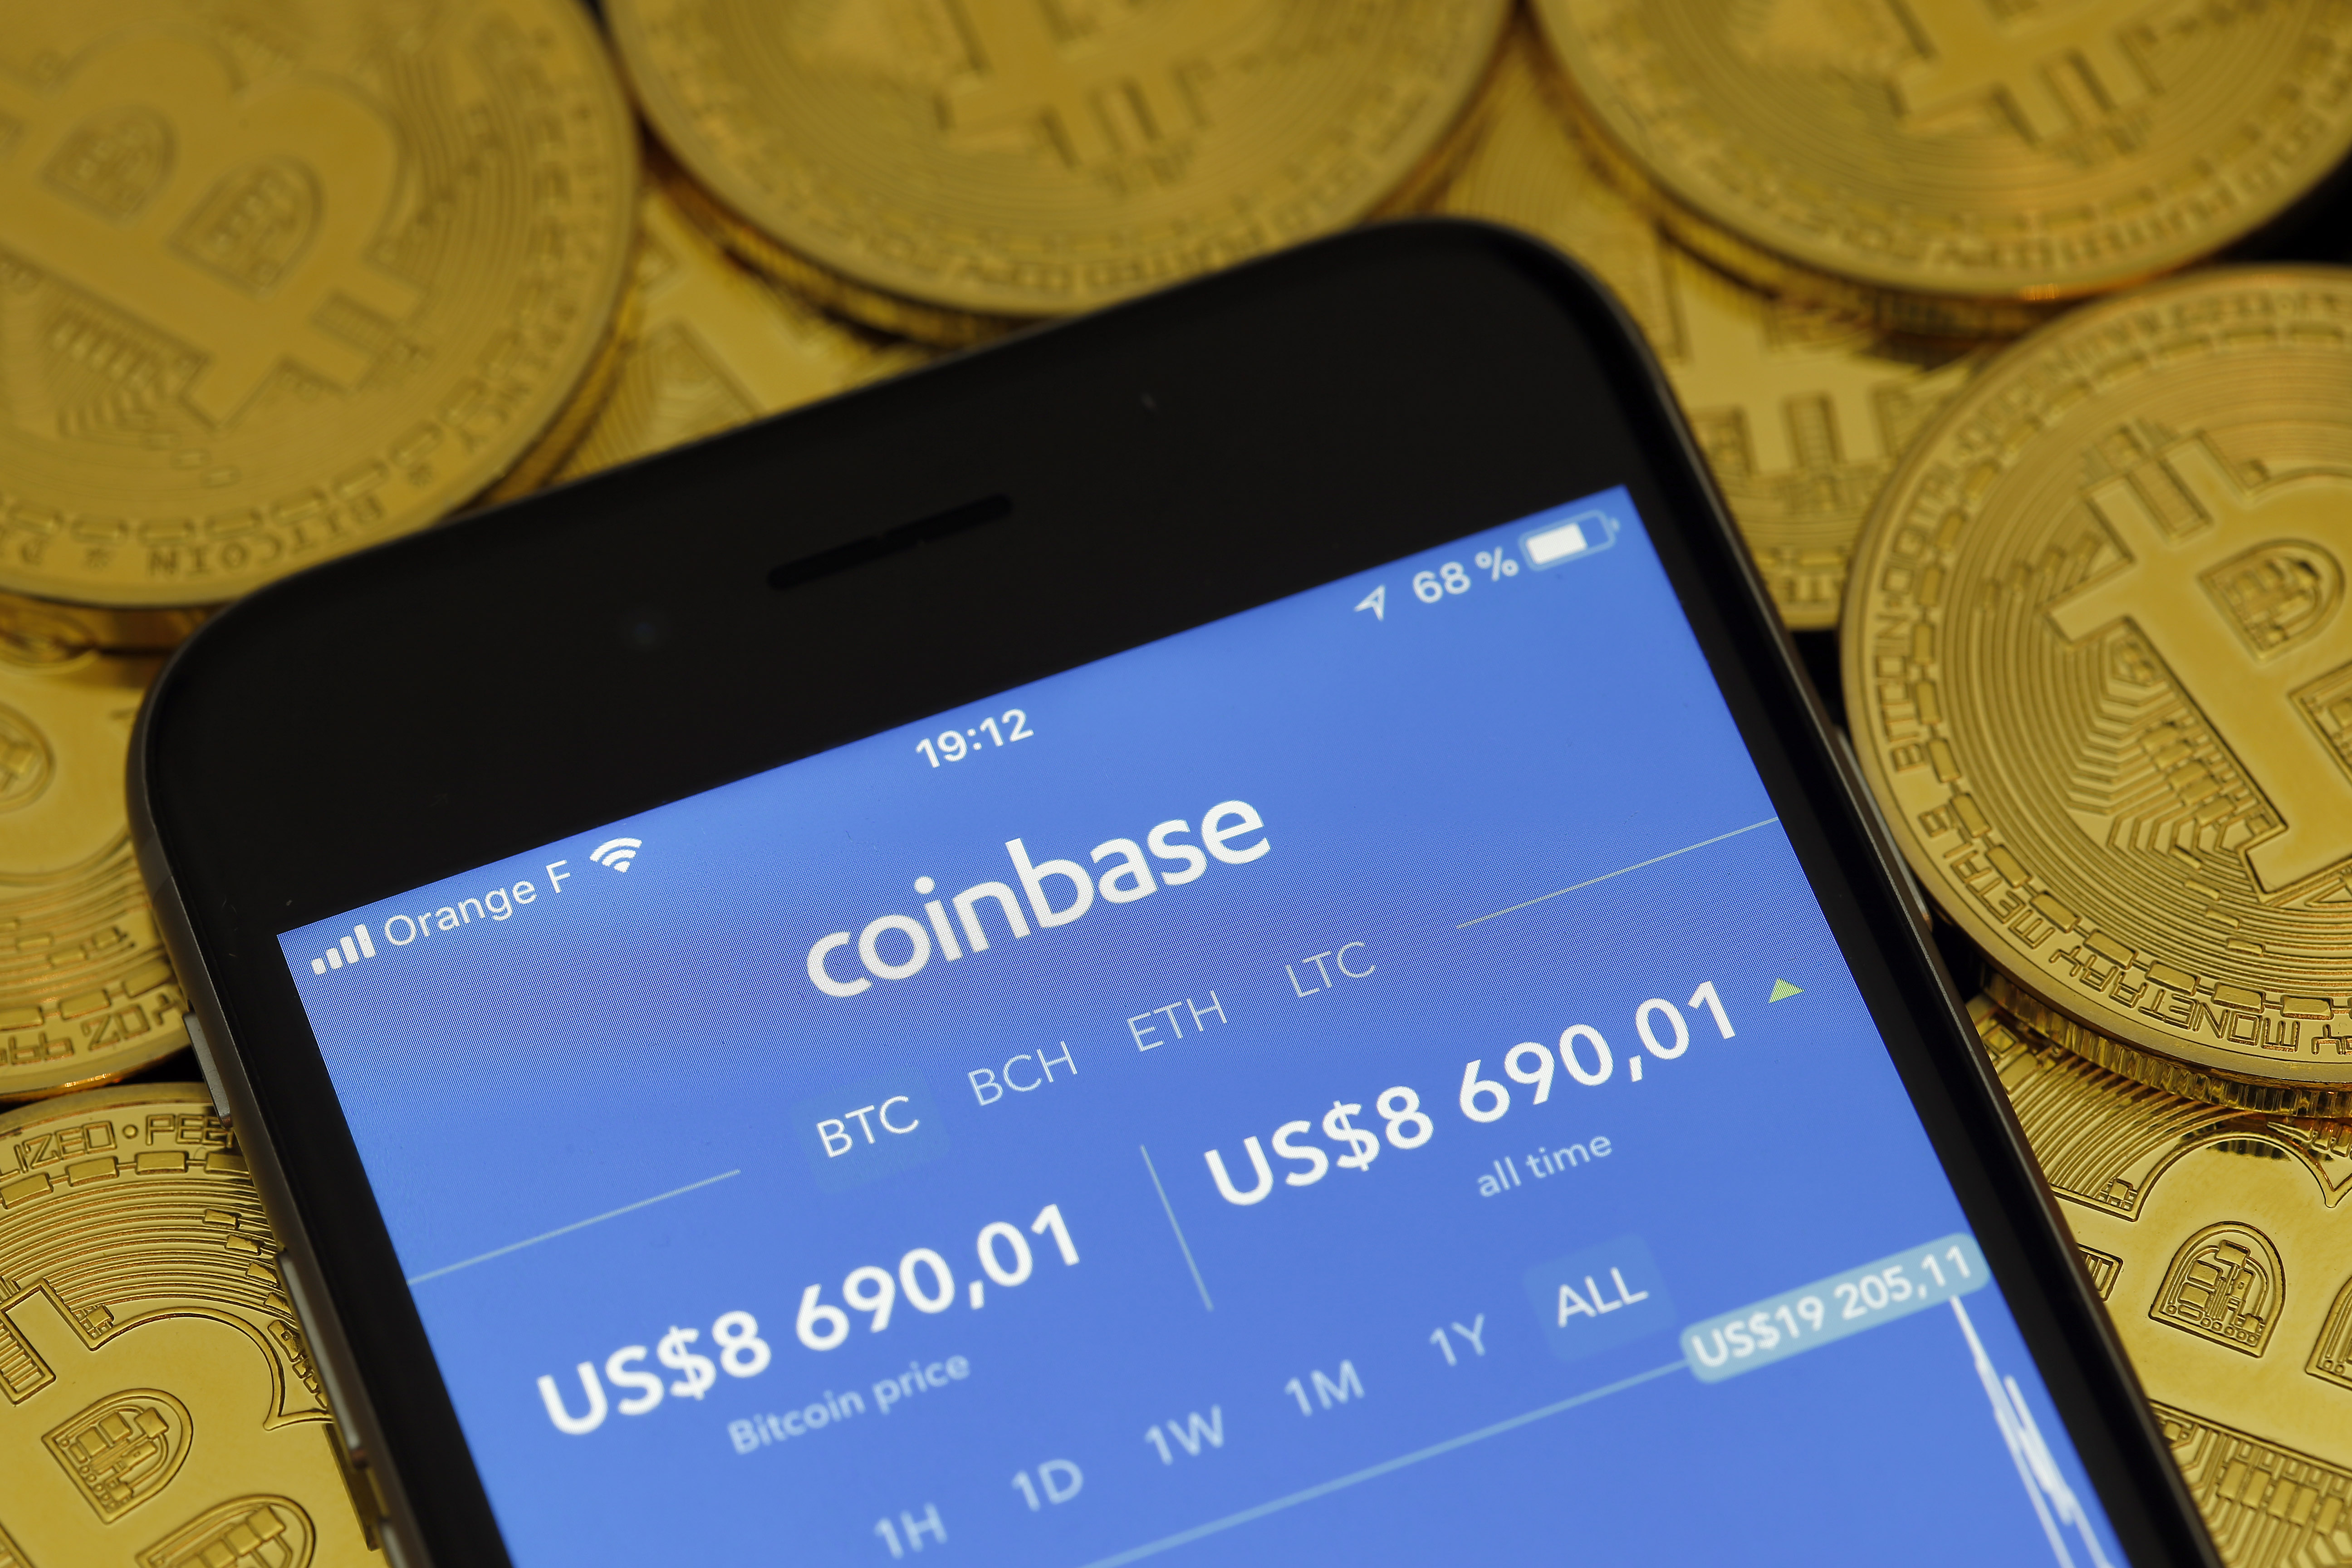 Coinbase: We will send data on 13,000 users to IRS | Ars ...